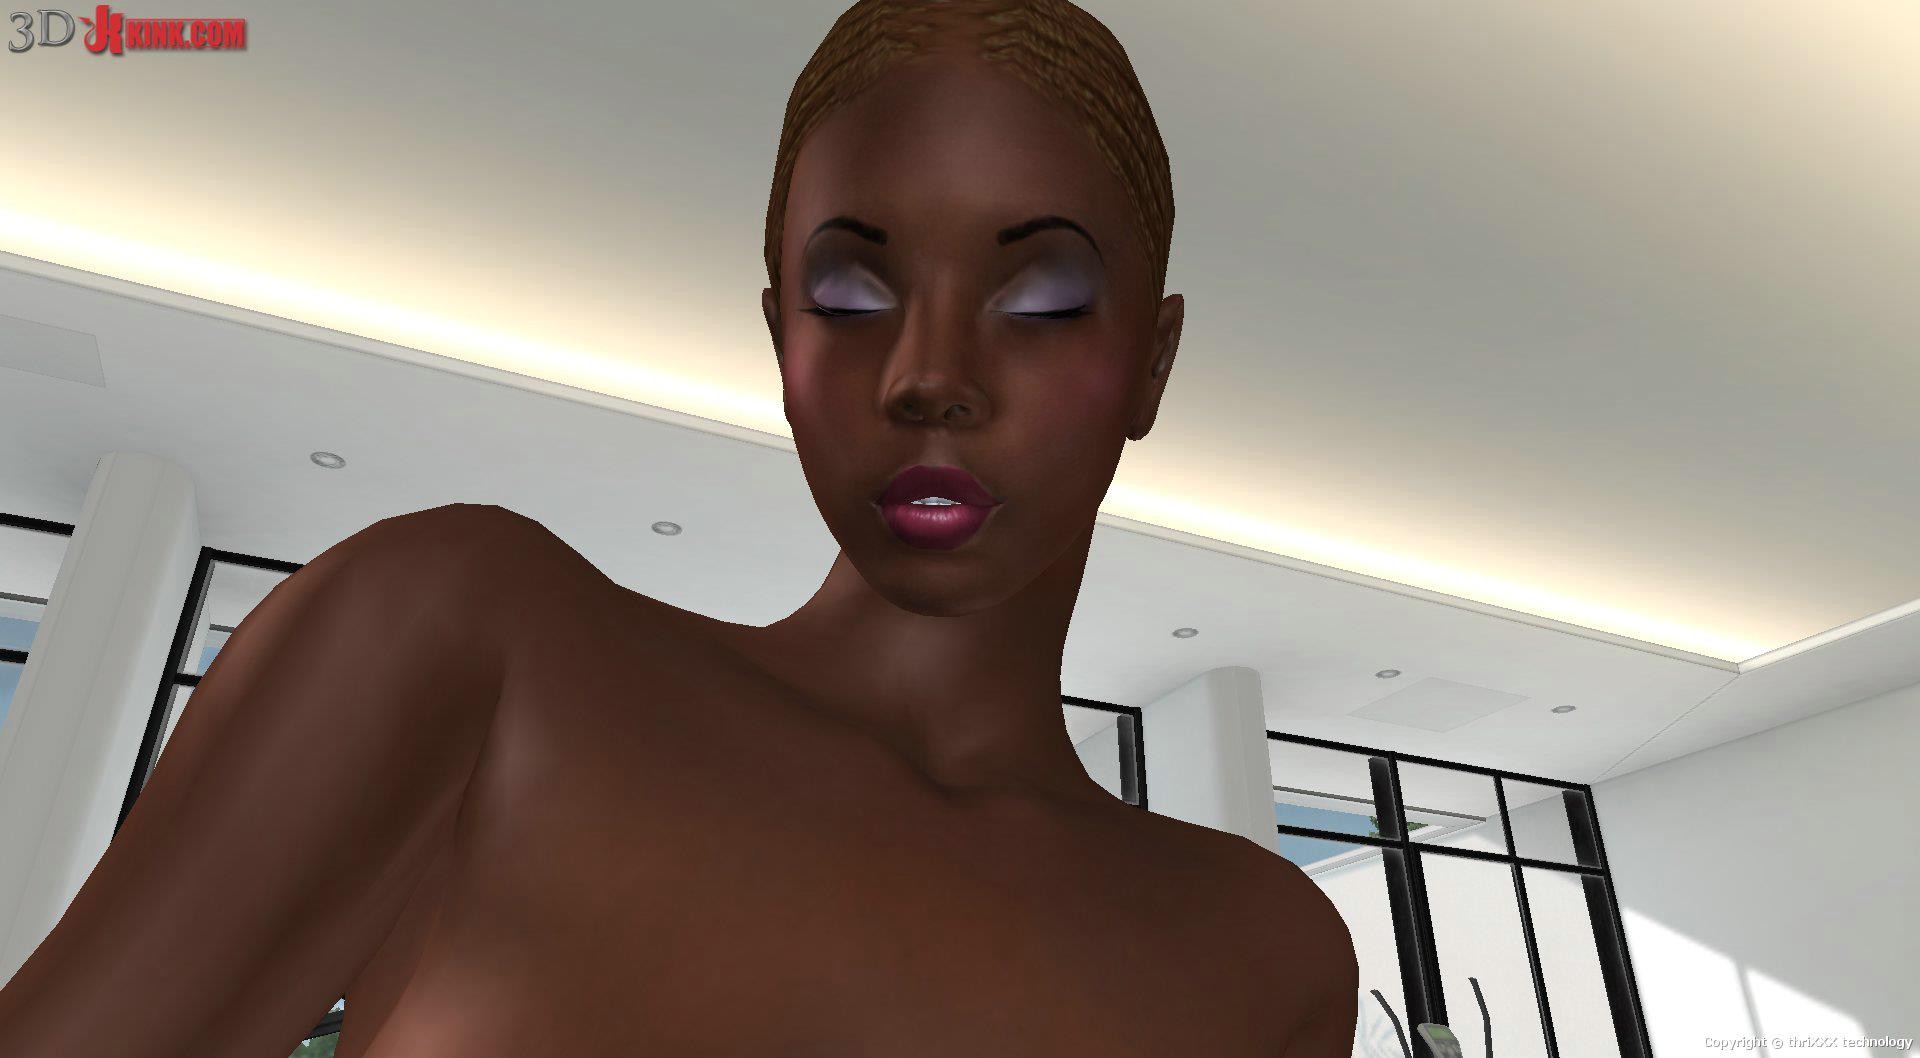 Interracial lesbian sex action created in interactive 3D game #69357183